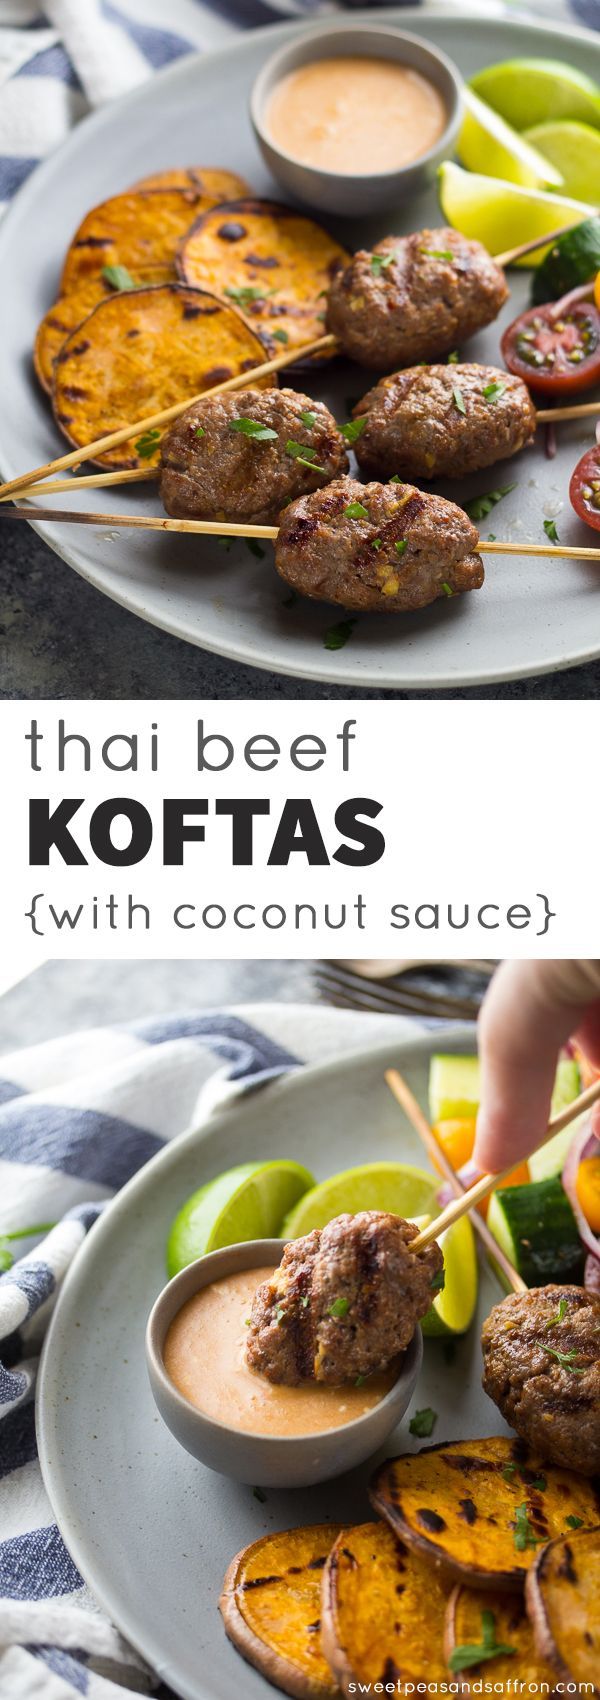 Thai Beef Koftas with Coconut Sauce, ready in 30 minutes! @sweetpeasaffron